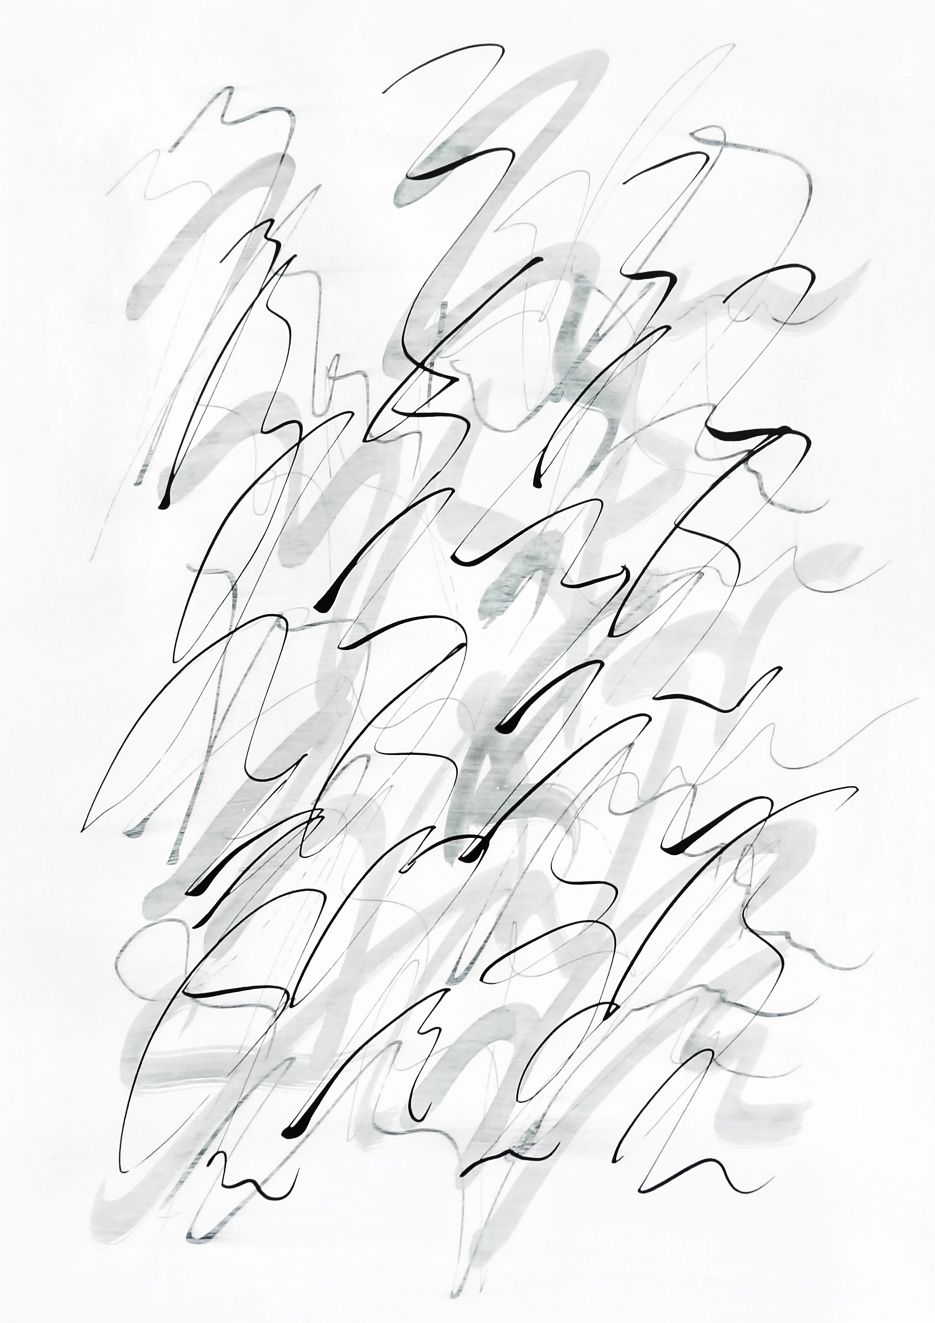  Untitled, 2019 calligraphy ink on paper 42,0 x 29,7 cm (32-19) 